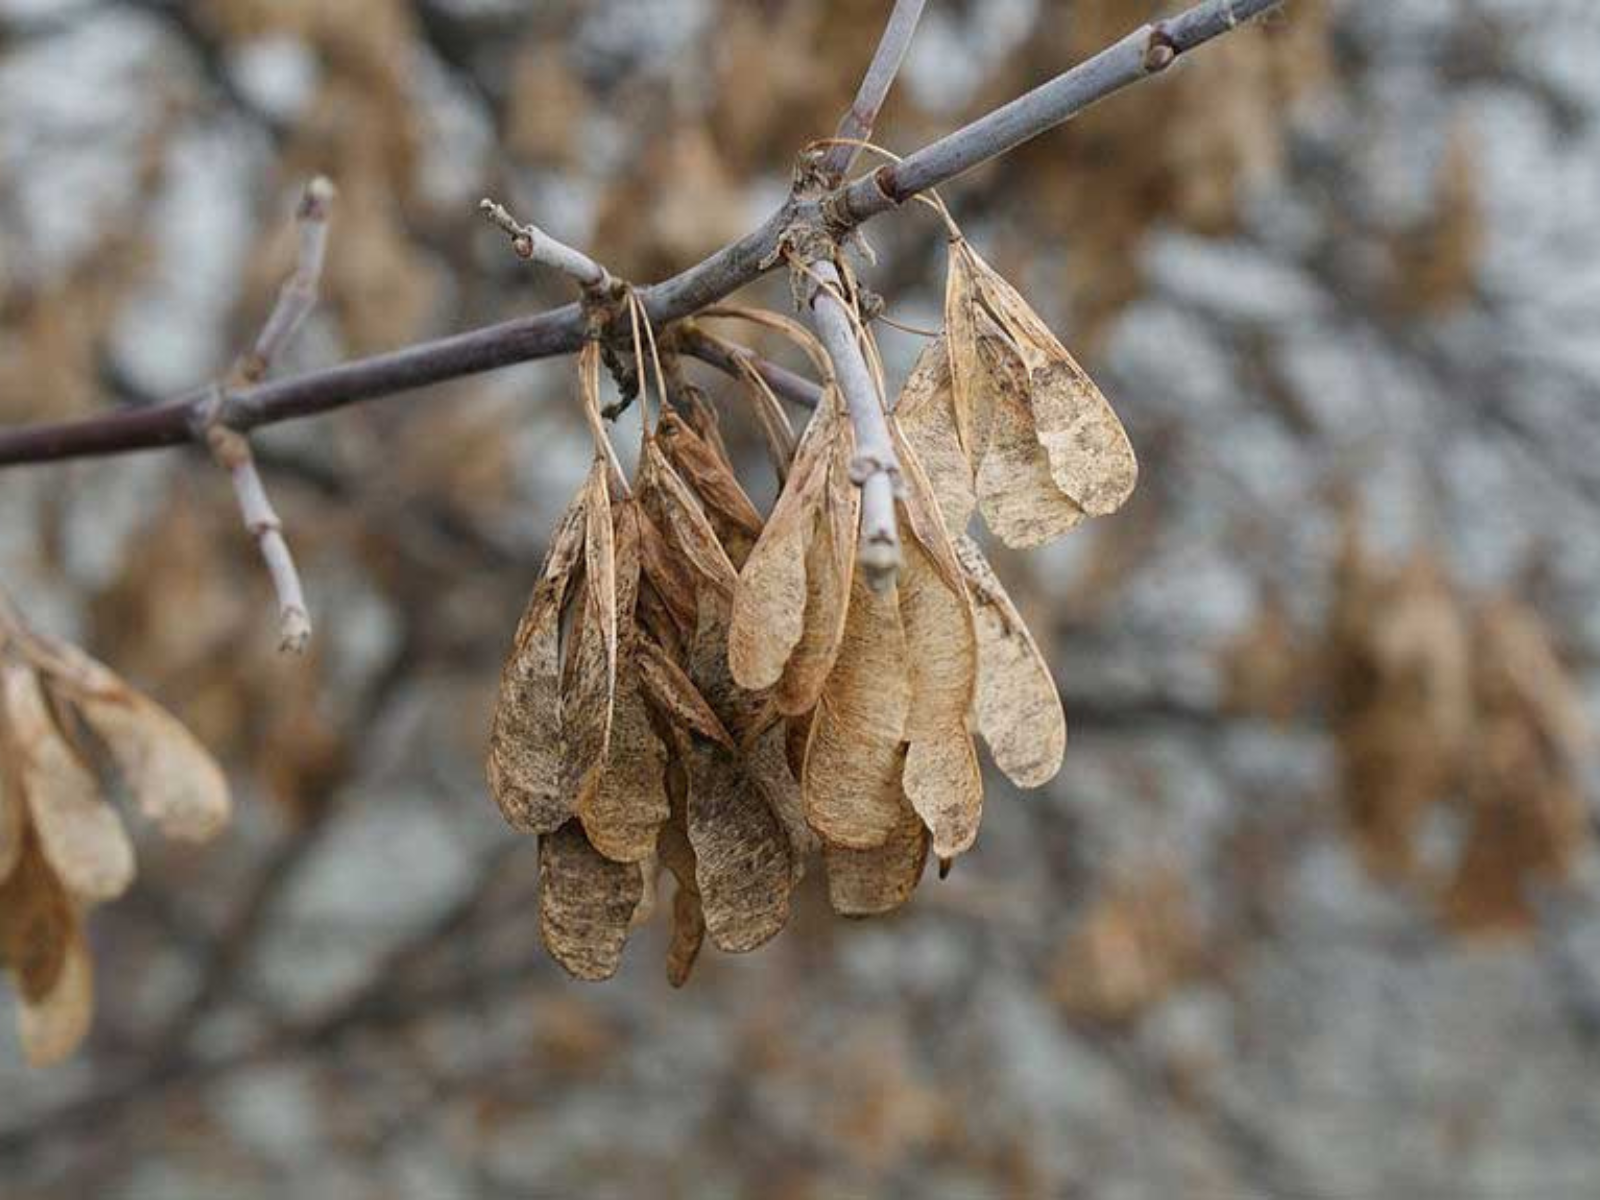 Close-up on a cluster of brown Manitoba maple tree seeds on a tree branch.